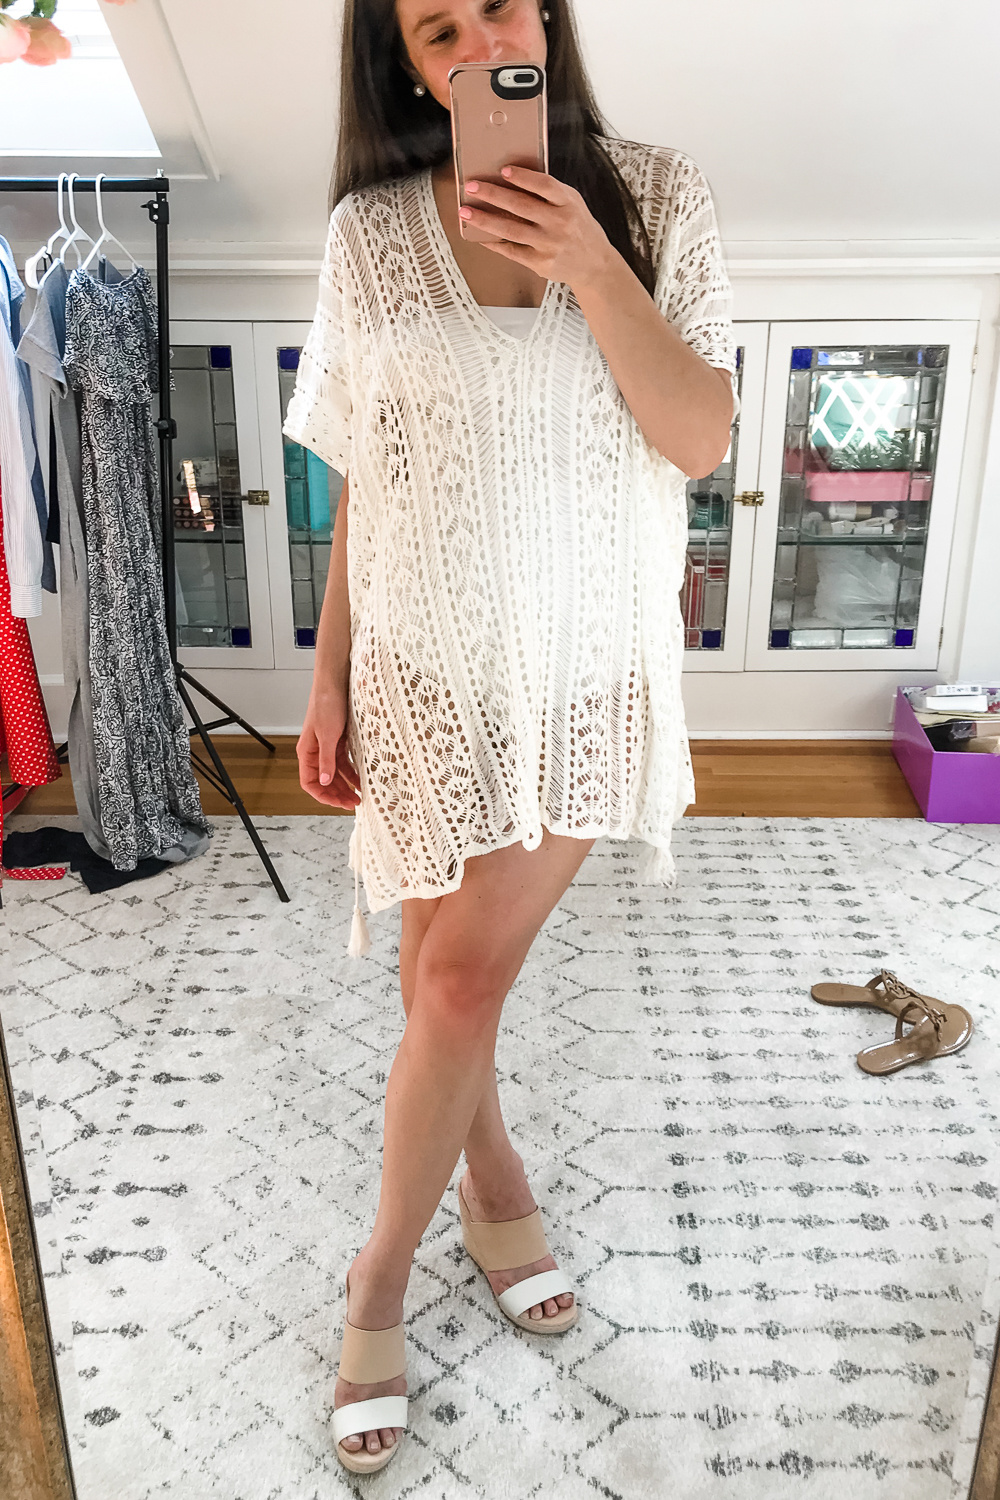 Slit White Wander Agio Net Cover-Up on Amazon, Amazon Summer Try-On Haul and Style Picks by popular affordable fashion blogger Stephanie Ziajka from Diary of a Debutante